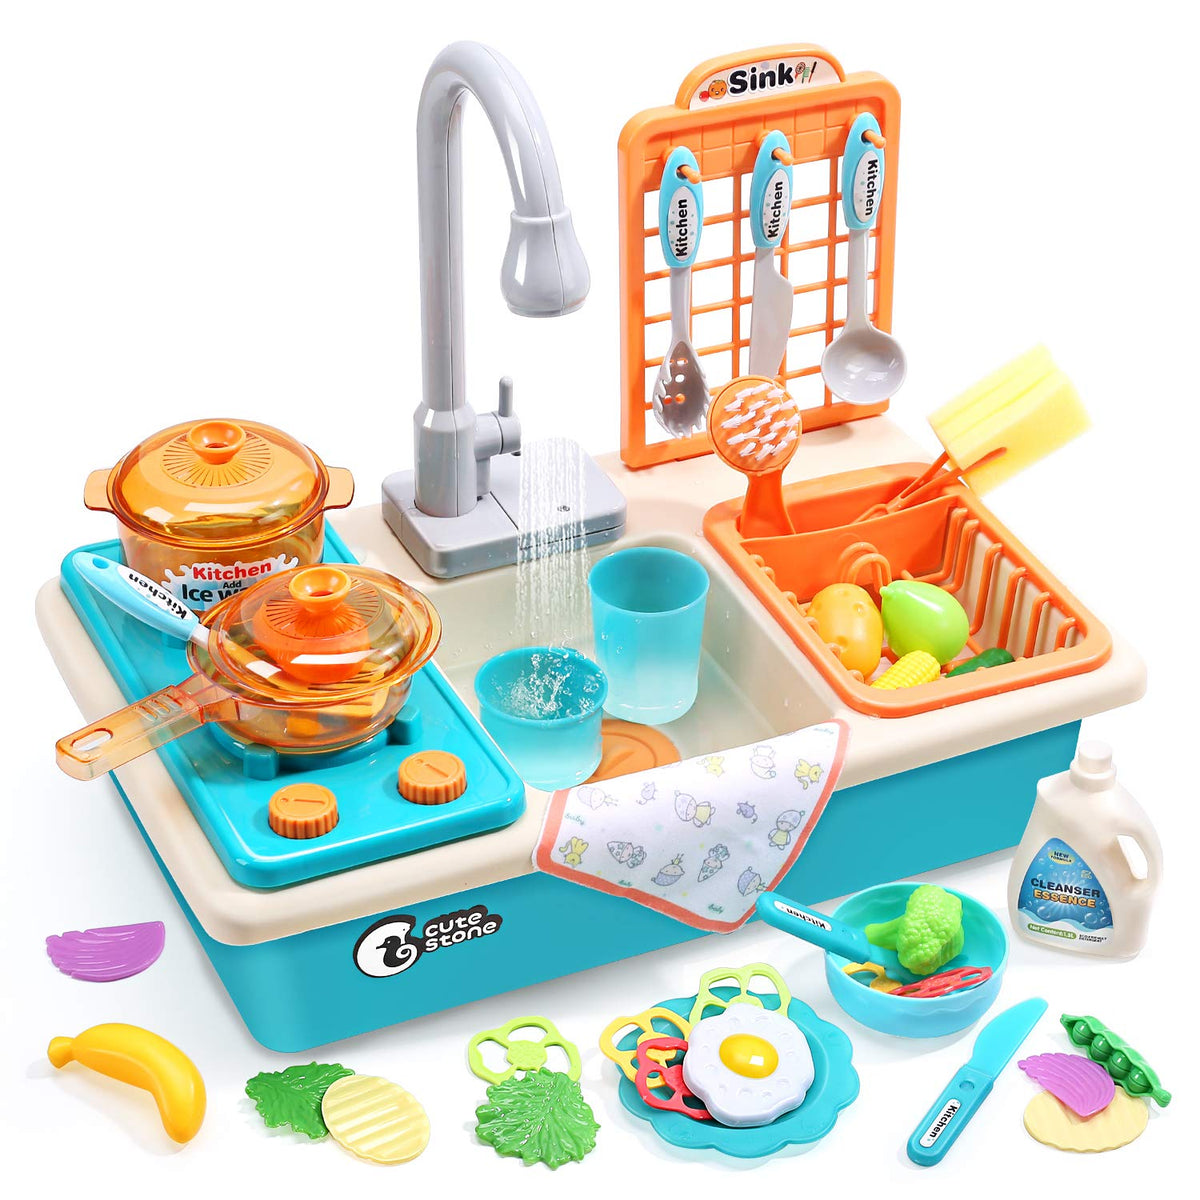 Cute Stone CUTE STONE Pretend Play Kitchen Toys with Stainless Steel Cookware  Pots and Pans Set, Toy Cooking Utensils, Apron, Cutting